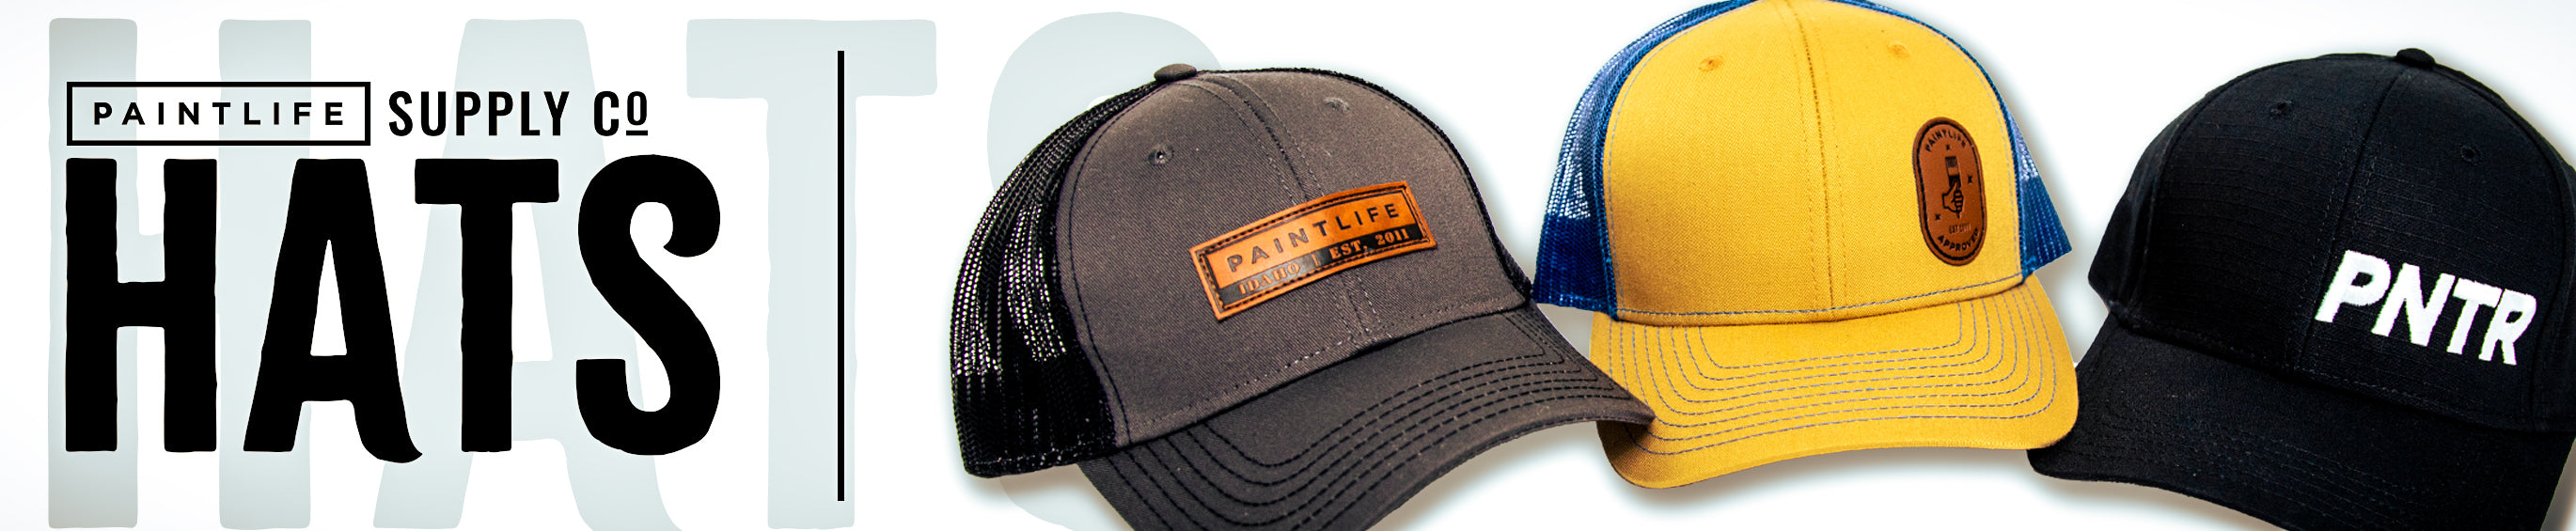 Paint Life Supply Co. Hats for Professional Painters